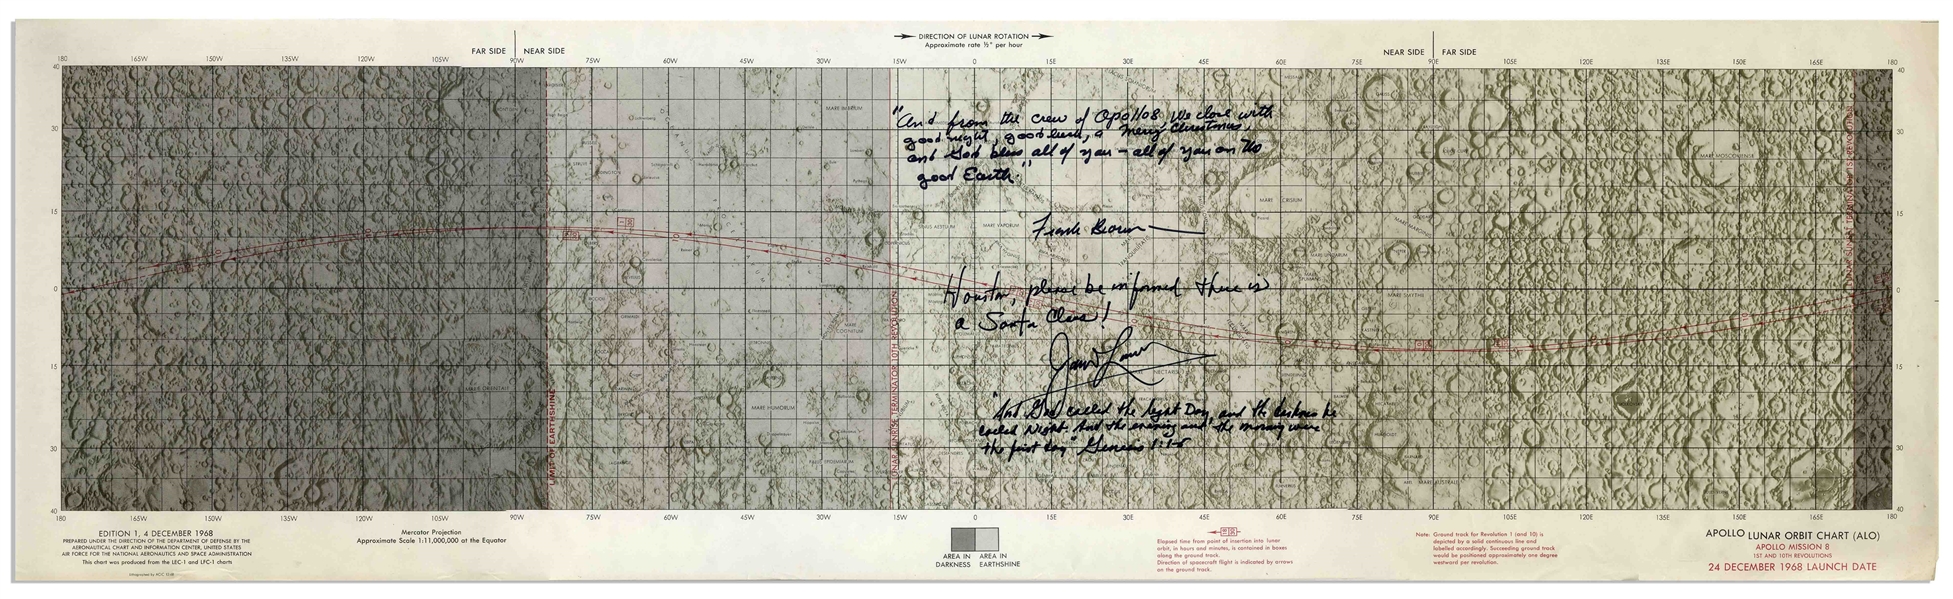 Frank Borman and James Lovell Signed Apollo 8 Lunar Orbit Chart -- The Men Also Write Their Historic Words From the 1968 Christmas Eve Broadcast, Including the Santa Claus Quote & Passage From Genesis